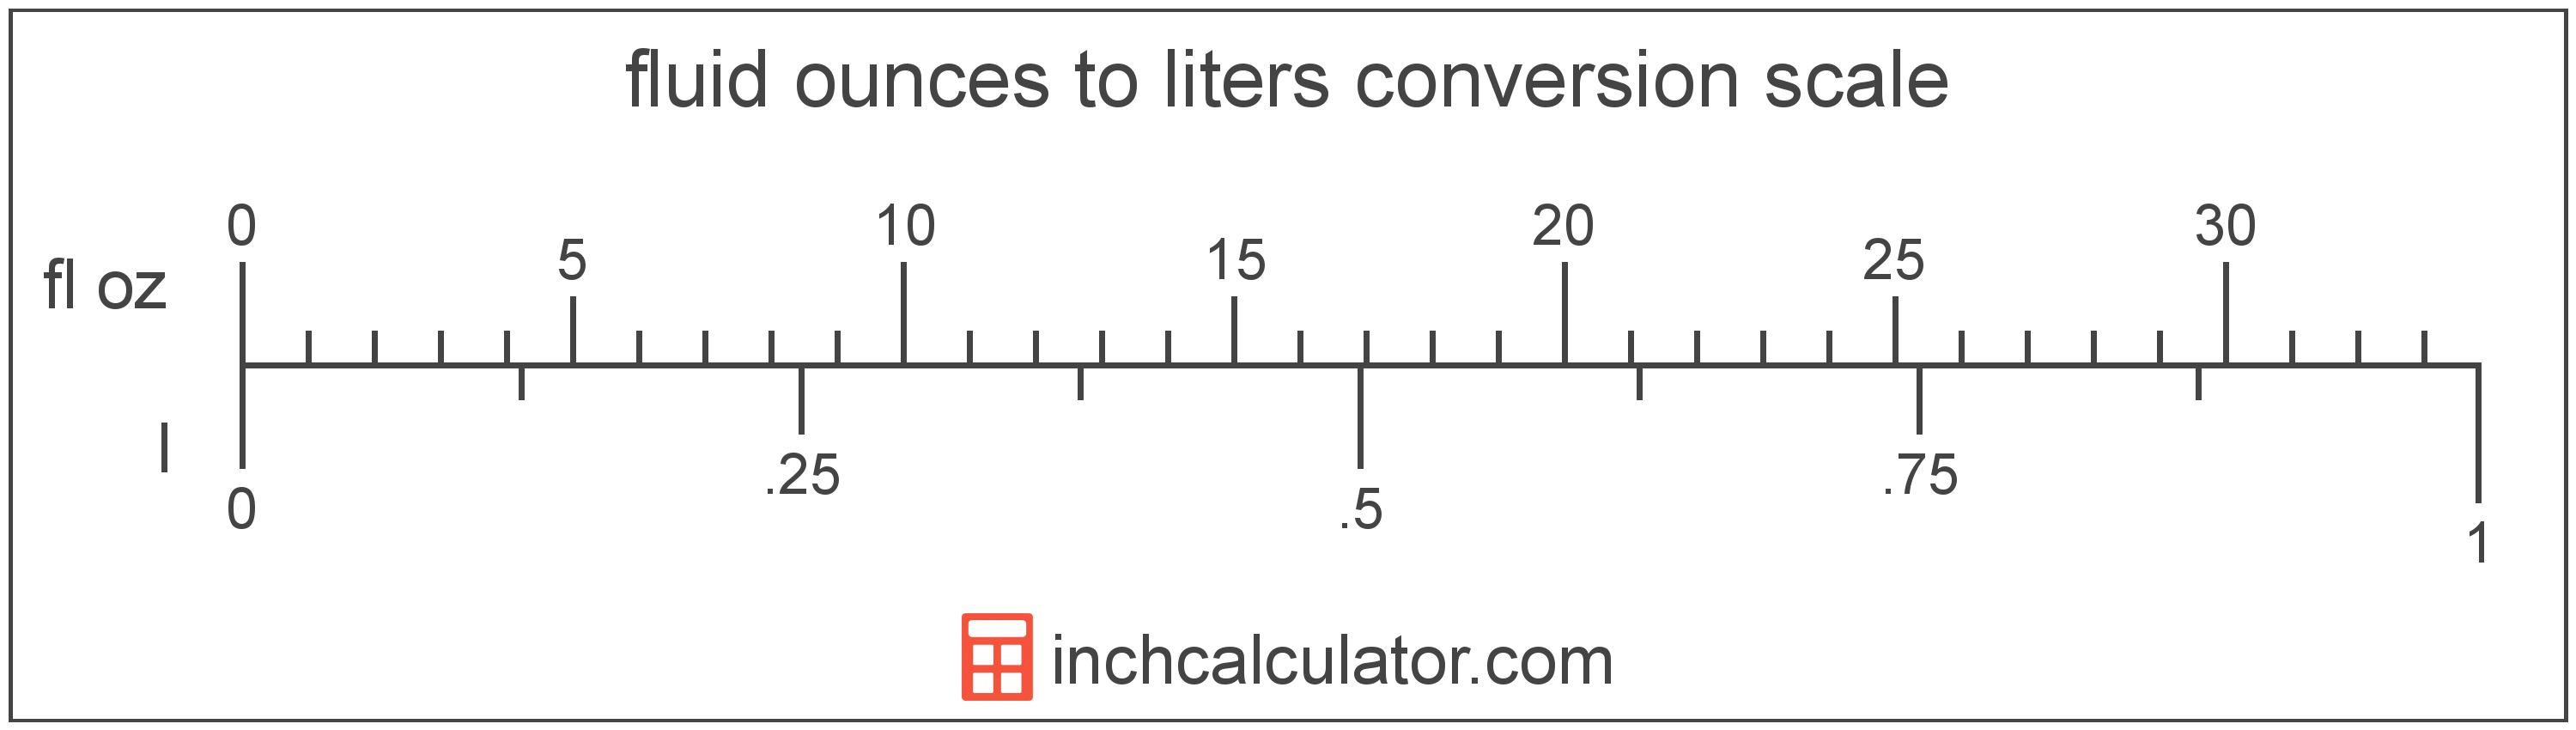 conversion scale showing fluid ounces and equivalent liters volume values